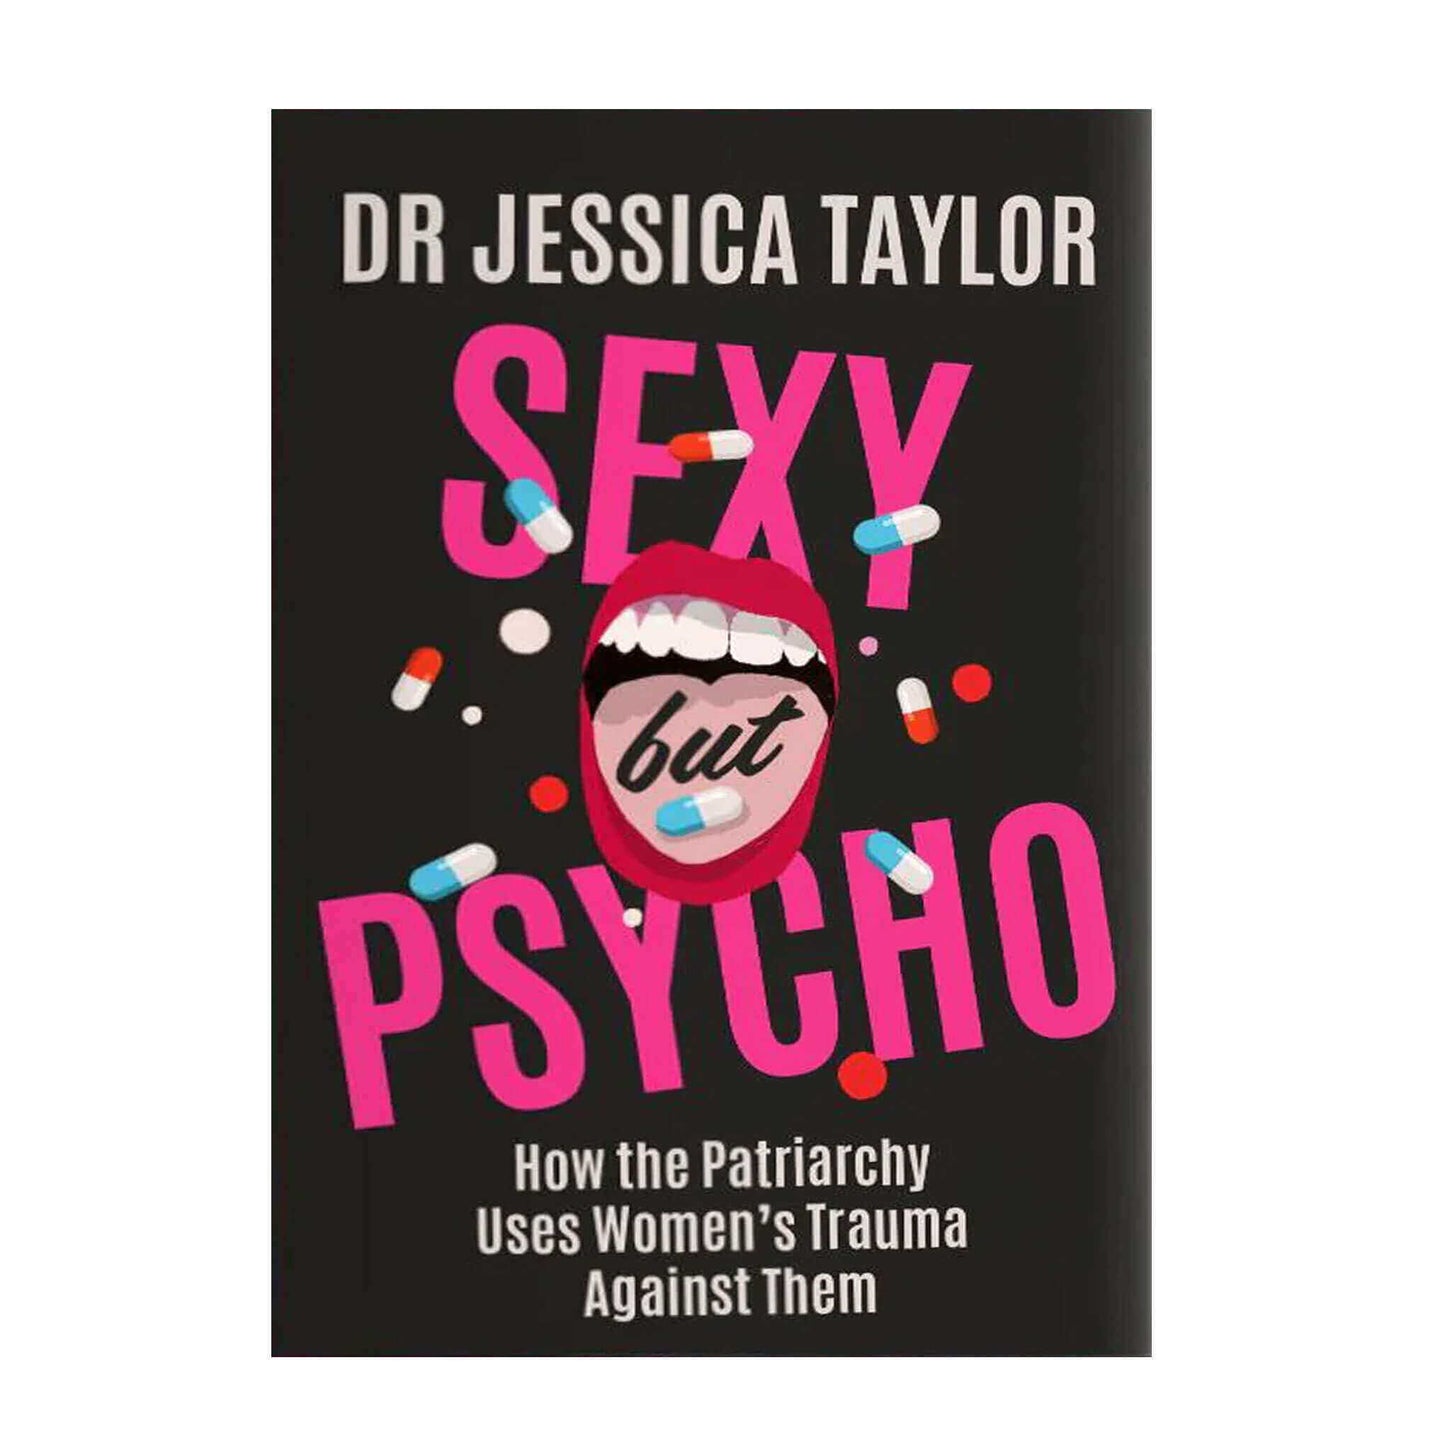 SIGNED FIRST EDITION Hardback ‘Sexy But Psycho: How the Patriarchy Uses Women's Trauma Against Them'